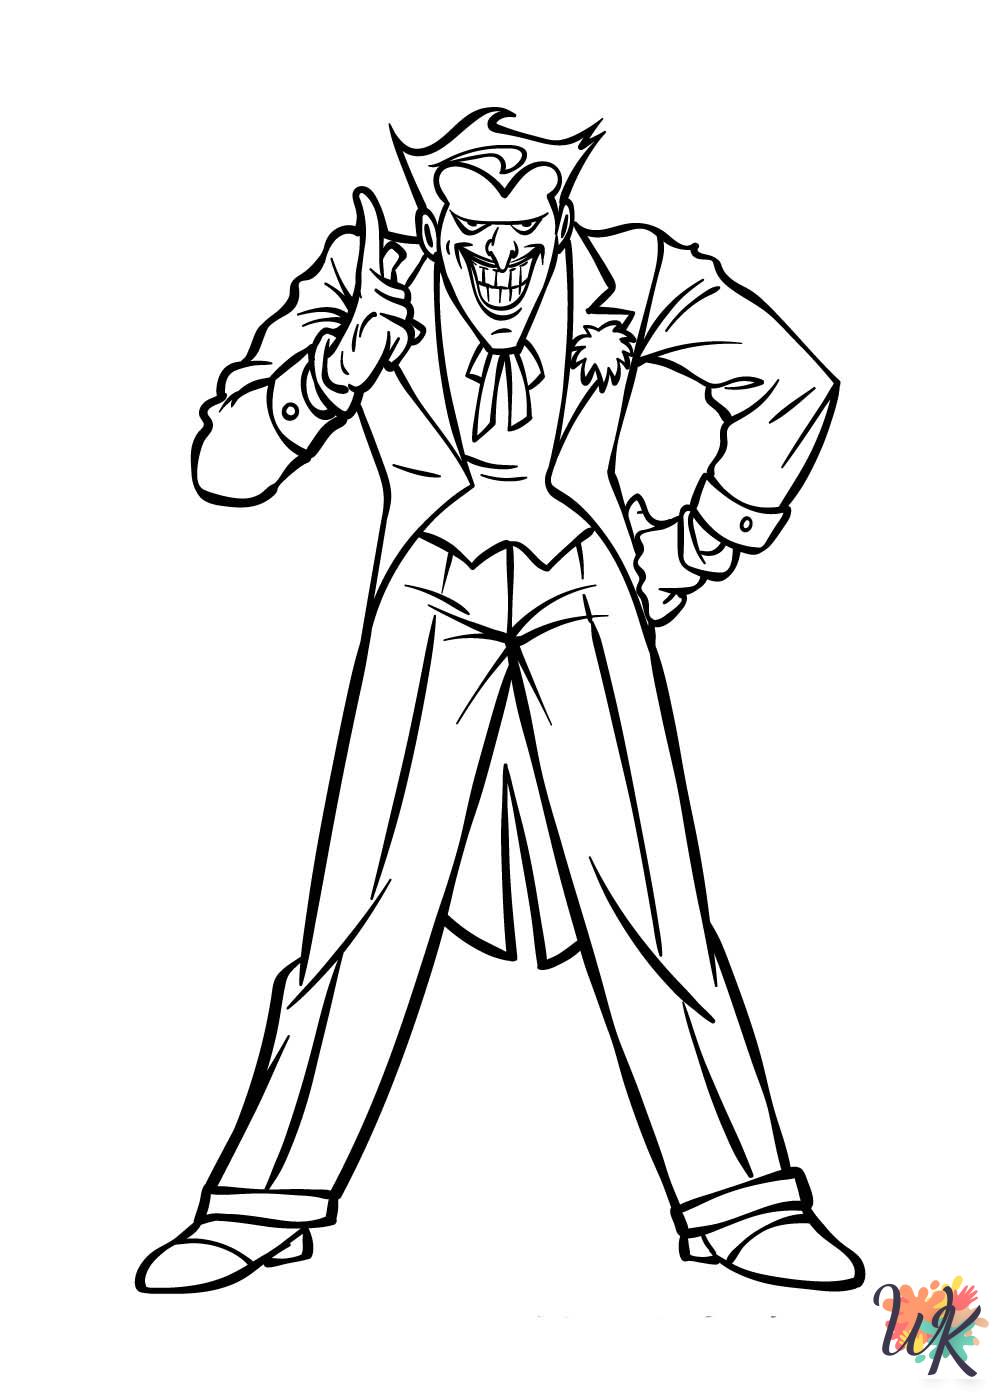 Joker ornaments coloring pages